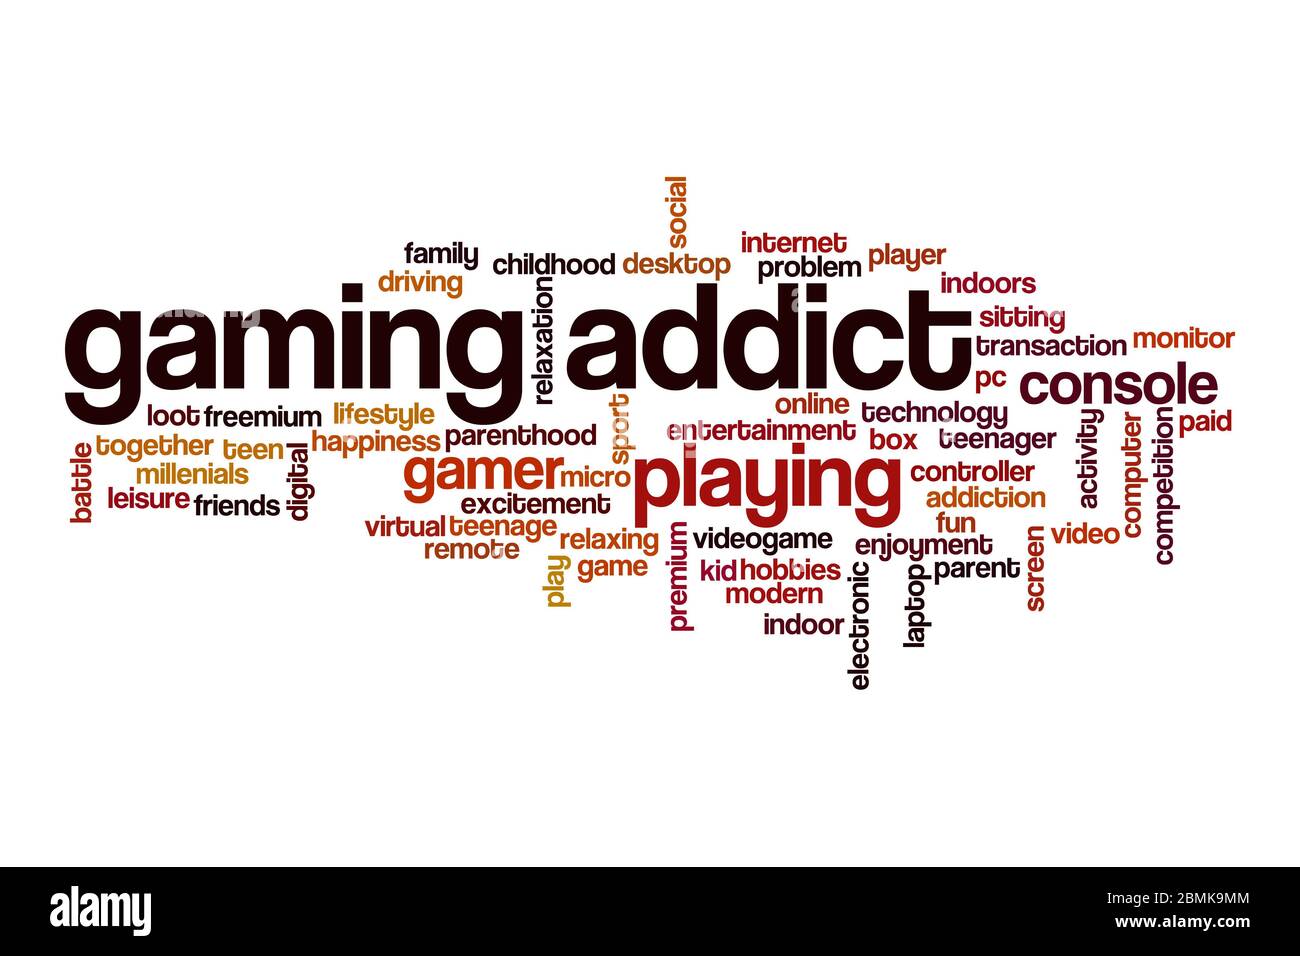 Gaming addict word cloud concept on white background Stock Photo